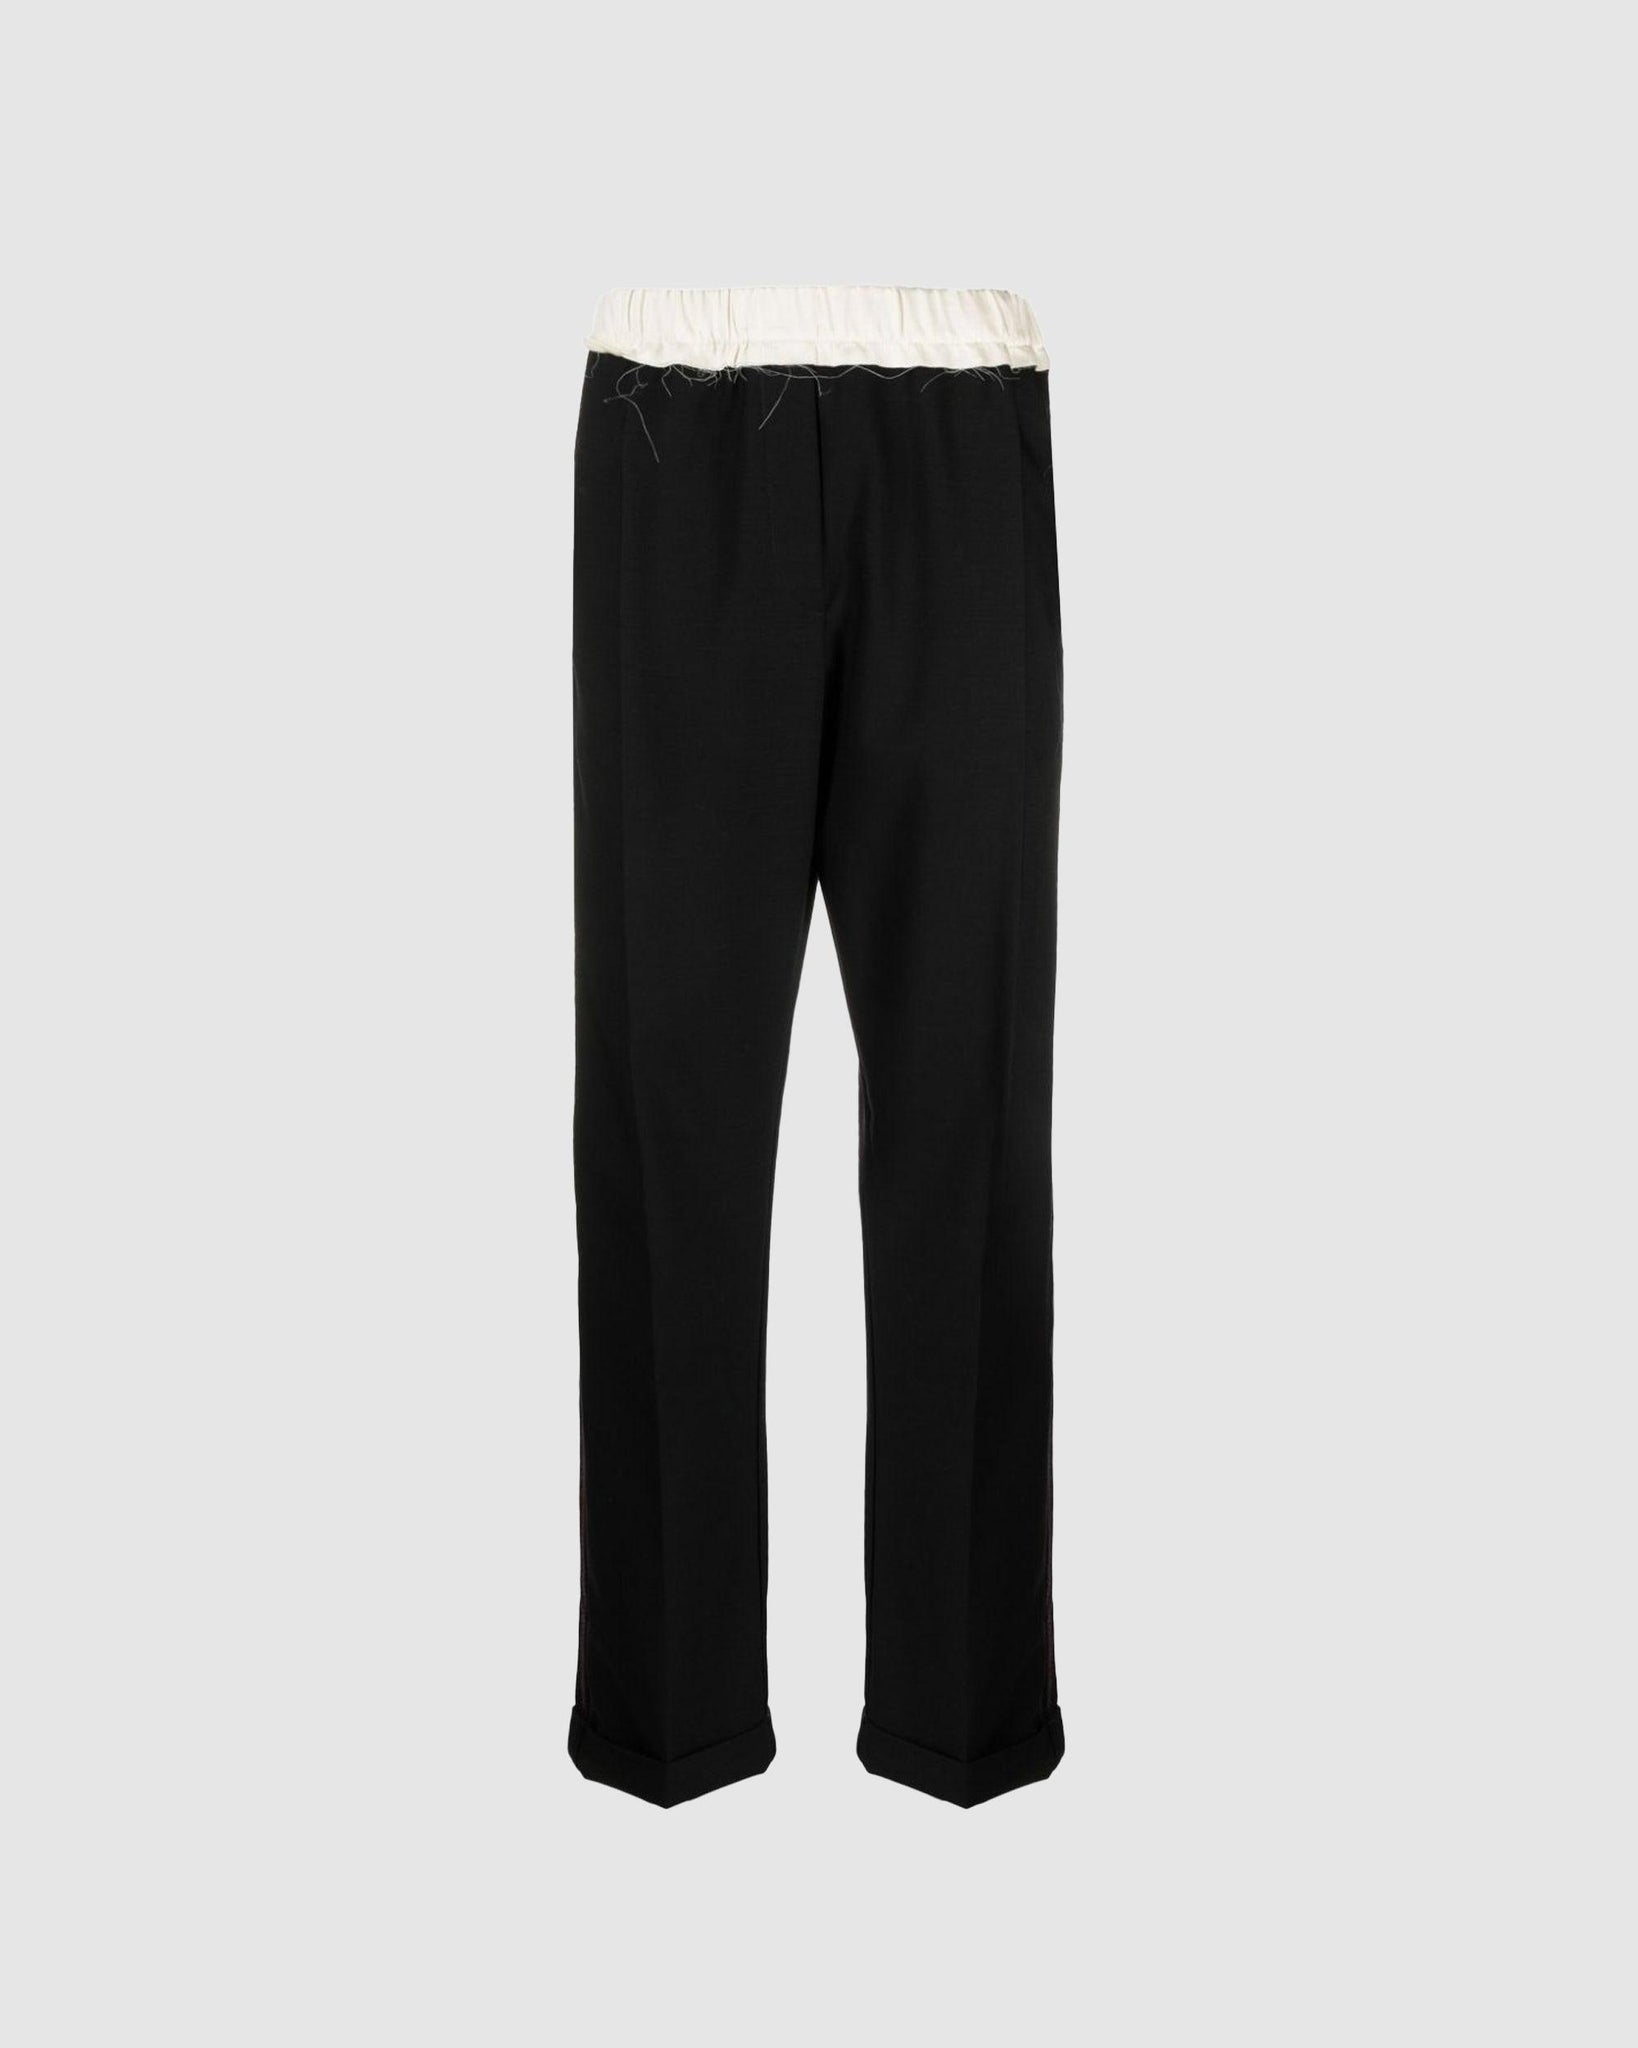 Seine Trousers - {{ collection.title }} - Chinatown Country Club 